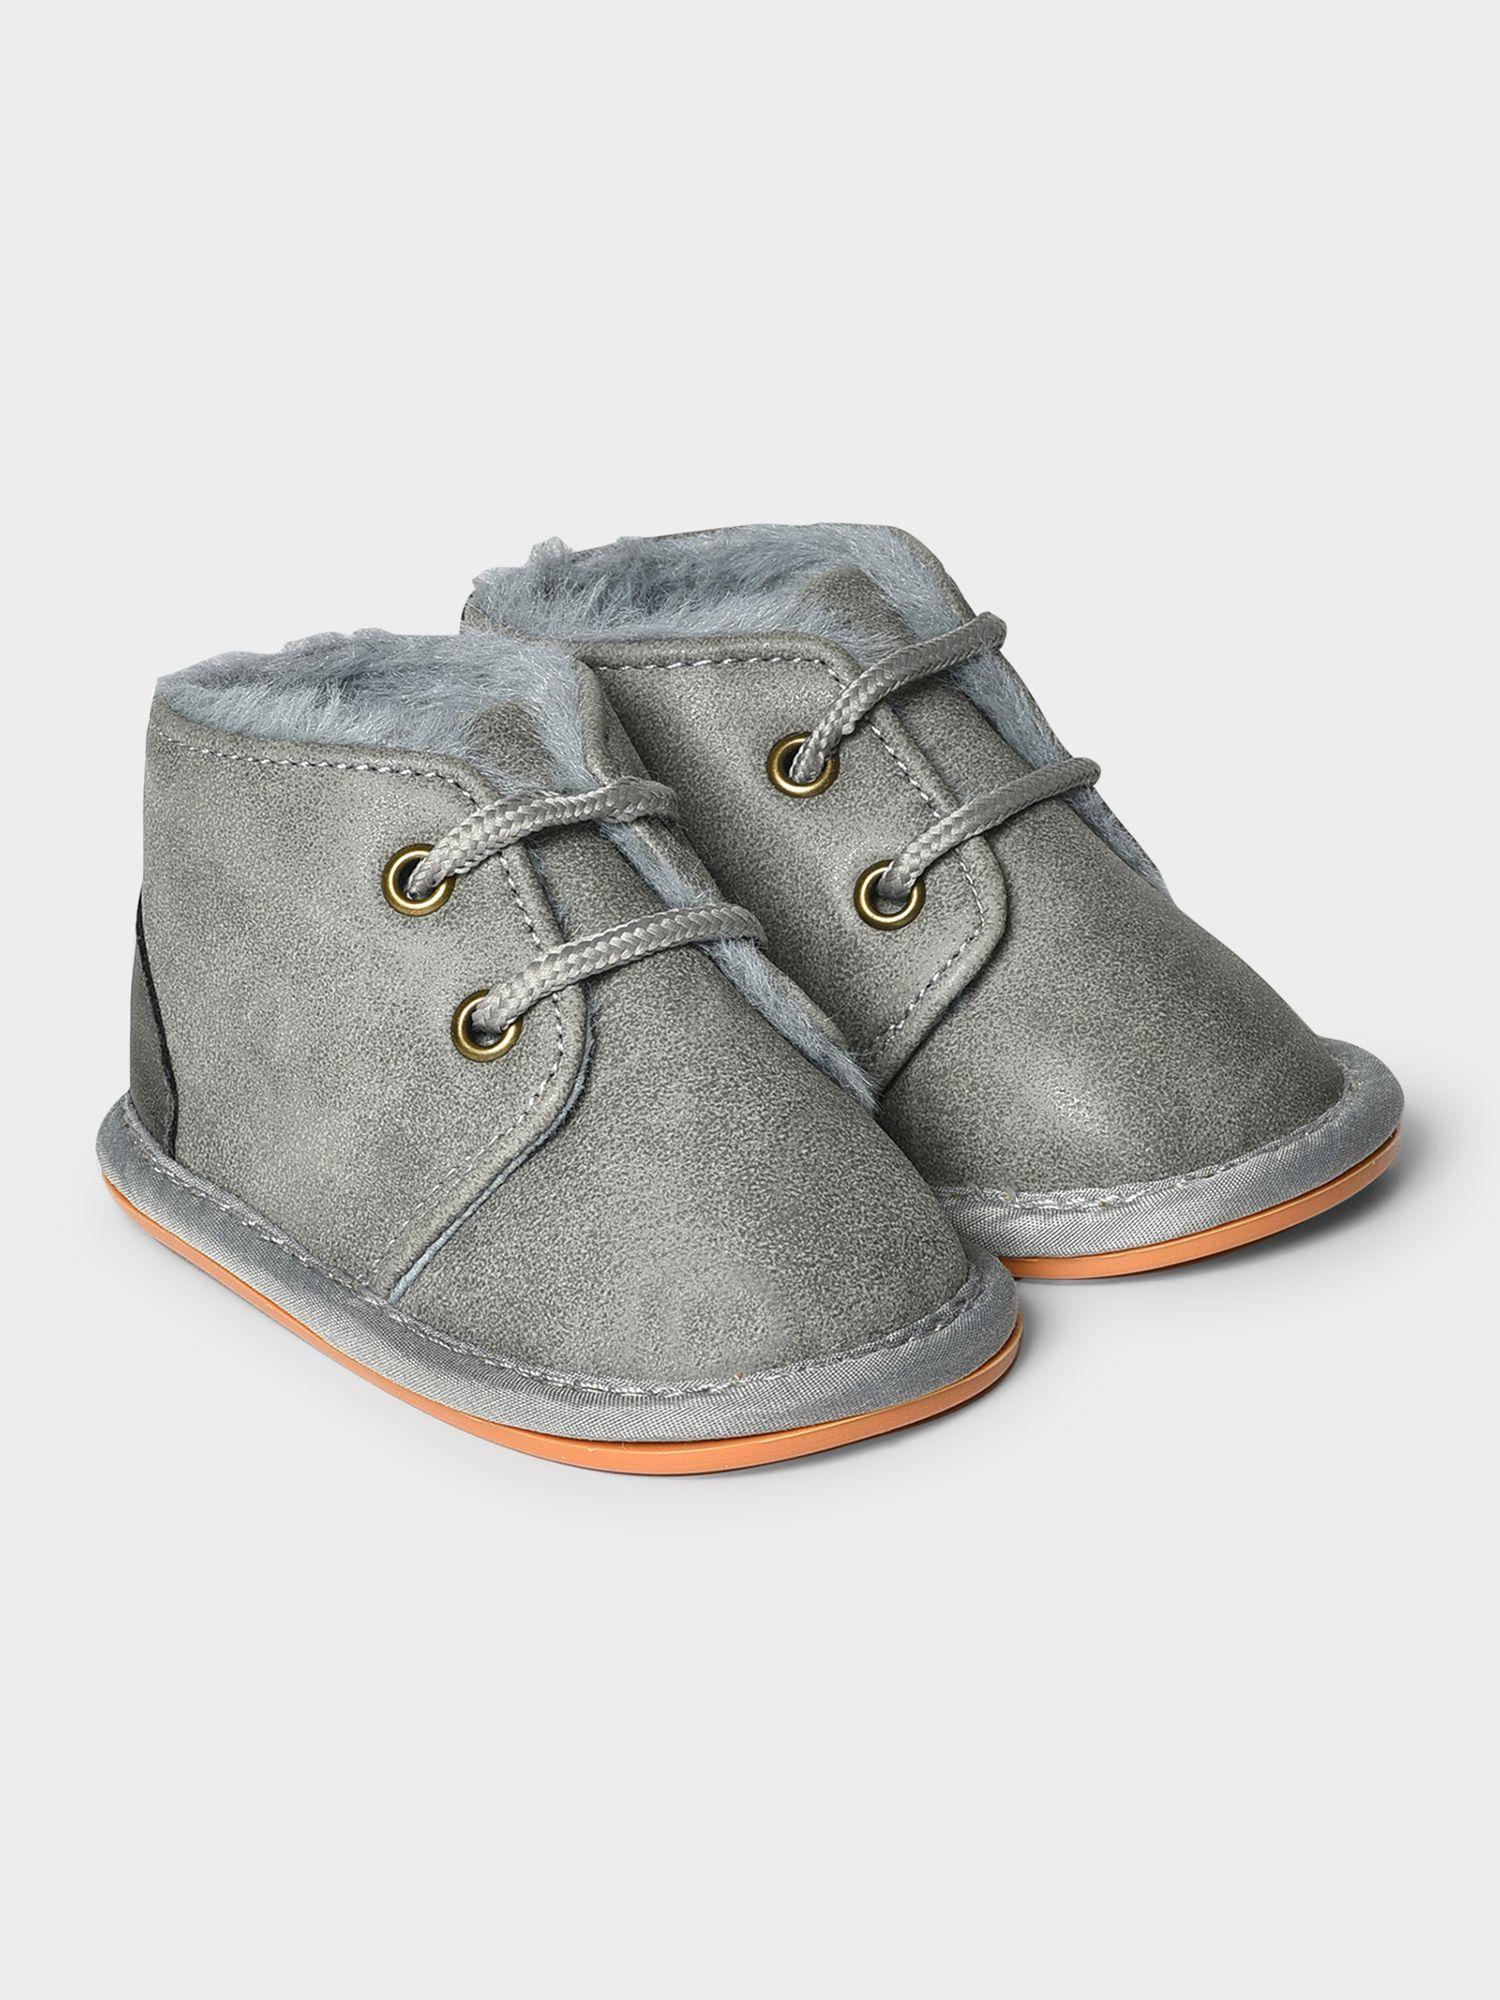 unisex grey solid casual shoes